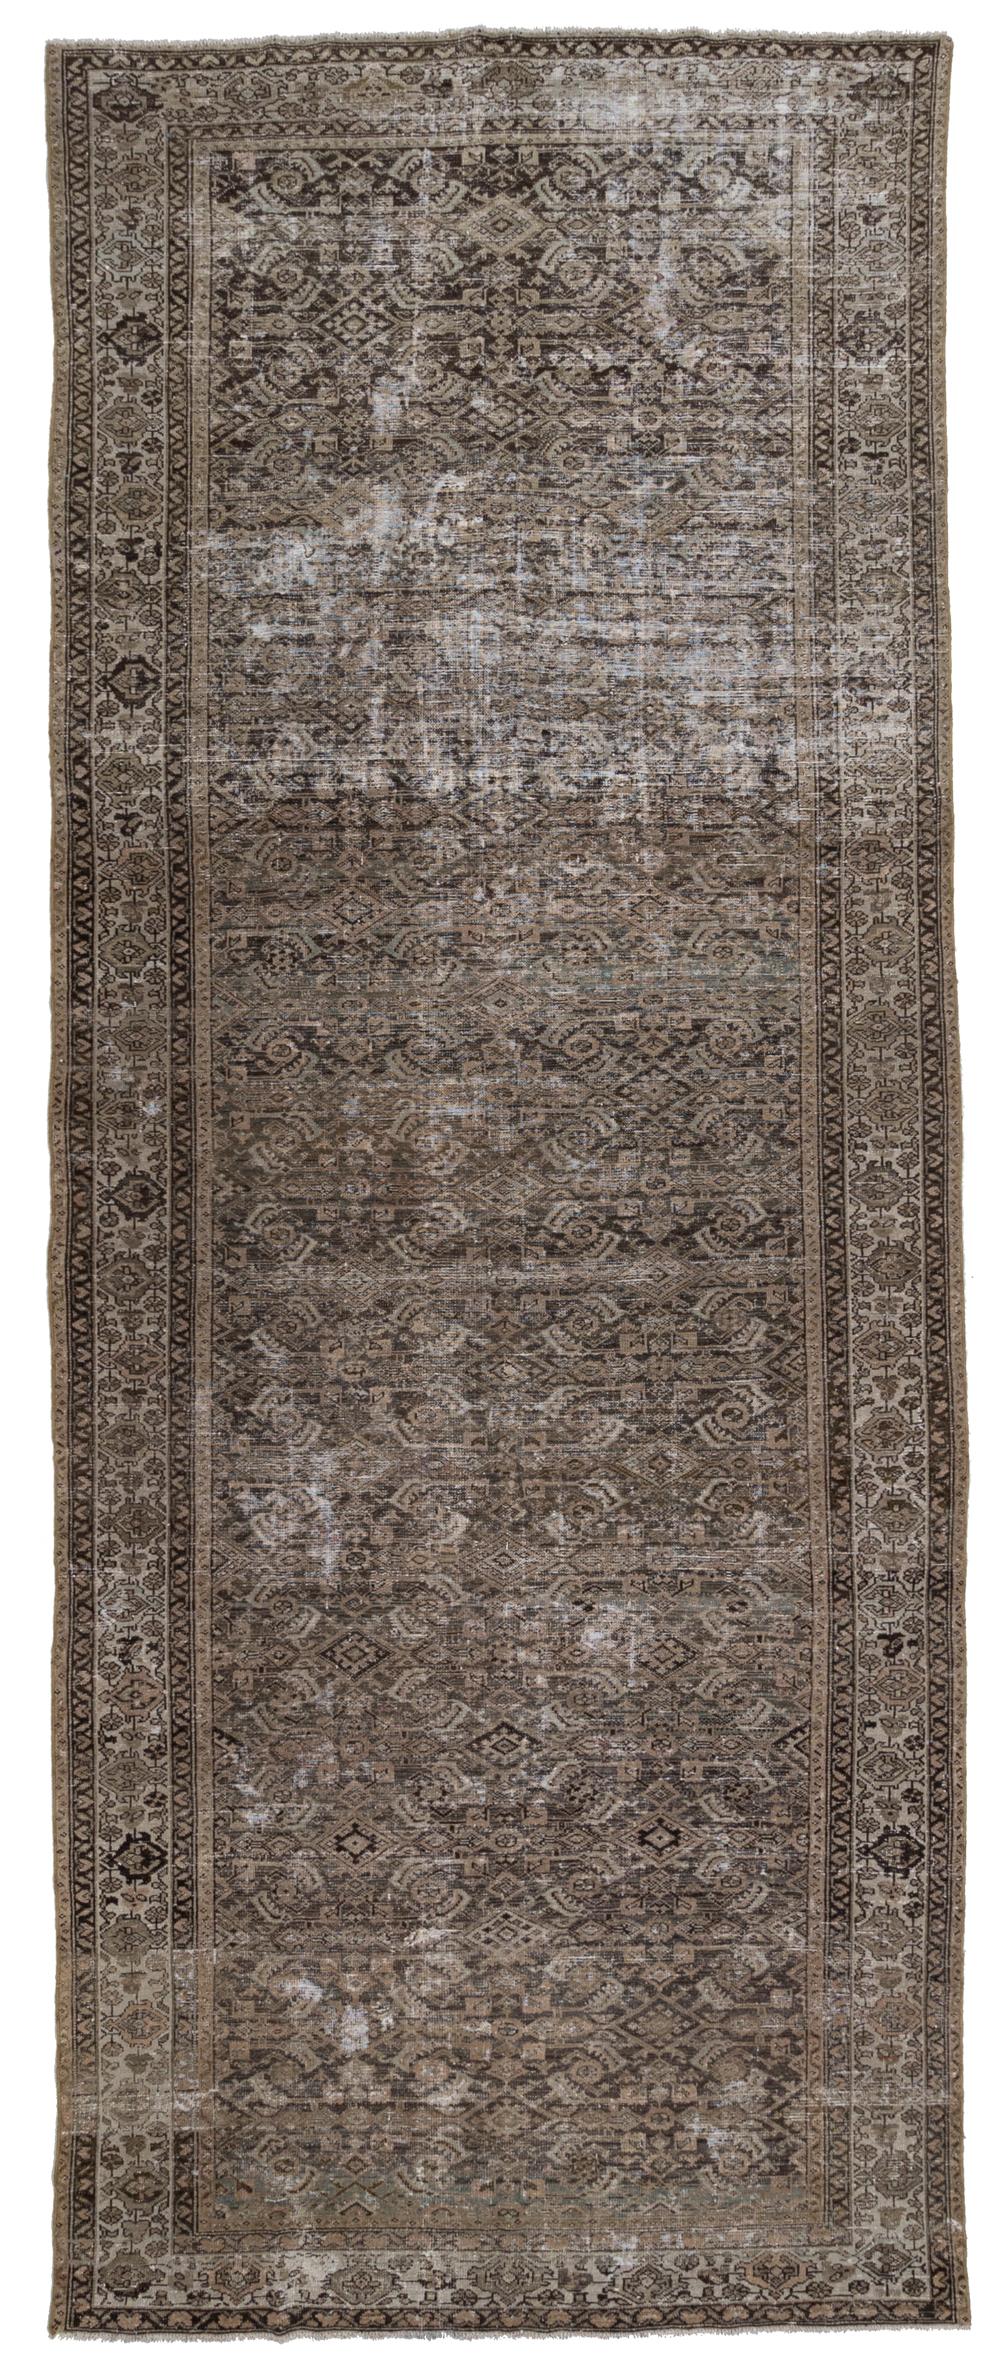 Age: 1920

Colors: Brown, Beige, Cream

Pile: Low

Wear Notes: 4

Material: Wool on Cotton 

Wear Guide:
Vintage and antique rugs are by nature, pre-loved and may show evidence of their past. There are varying degrees of wear to vintage rugs; some